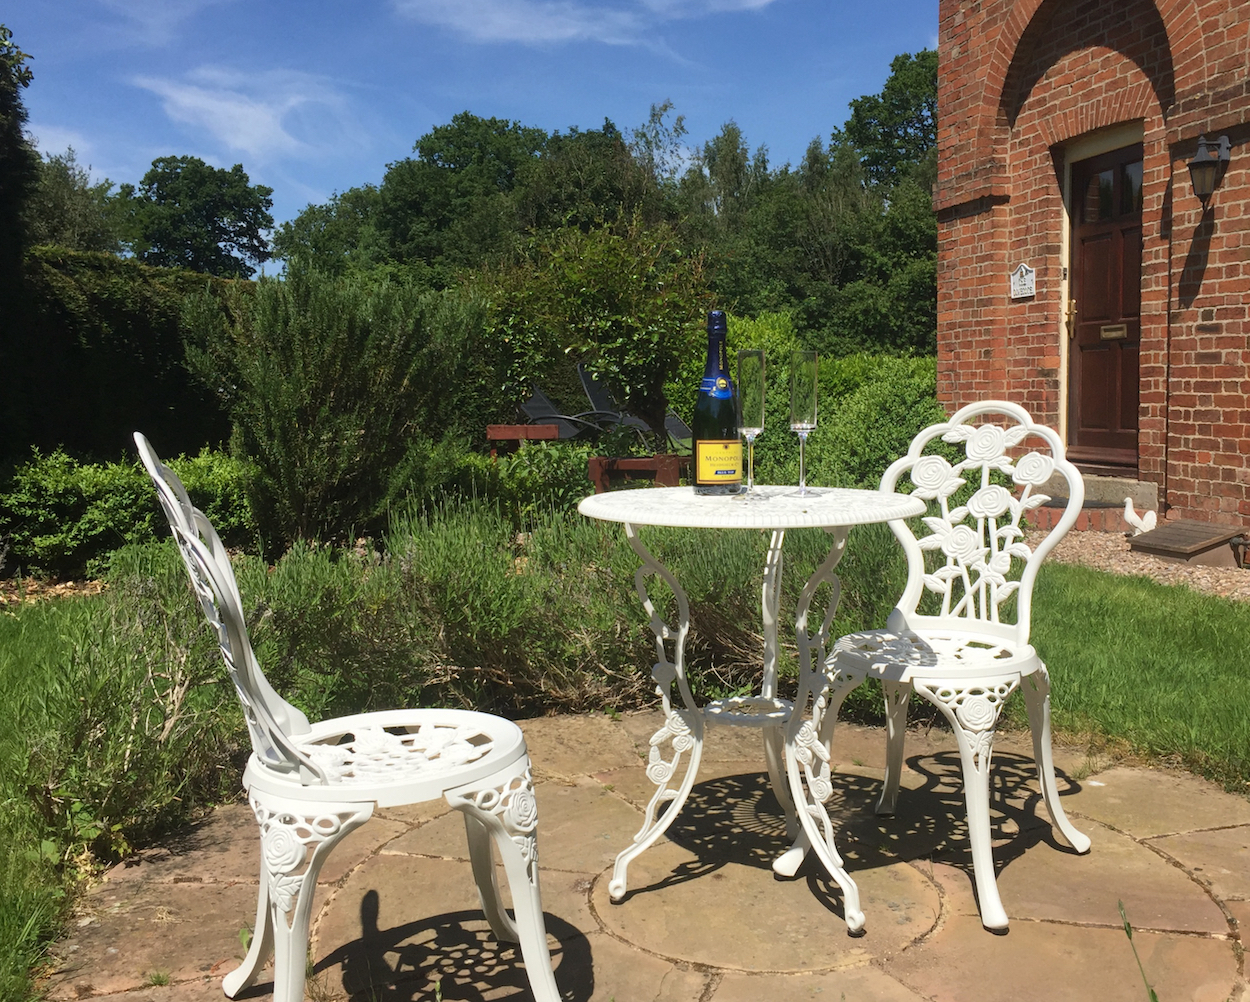 Where did the garden bistro set come from?